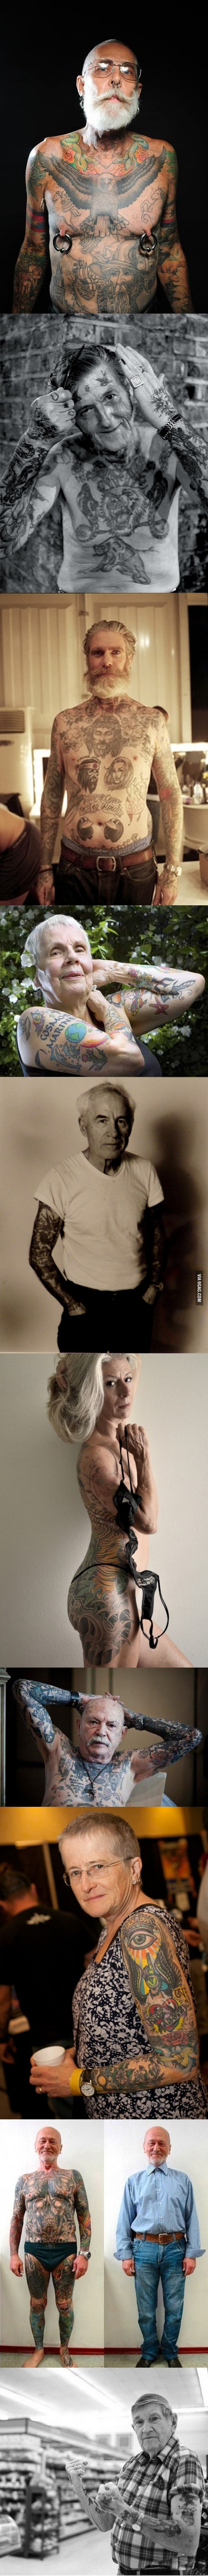 check out these tattooed seniors